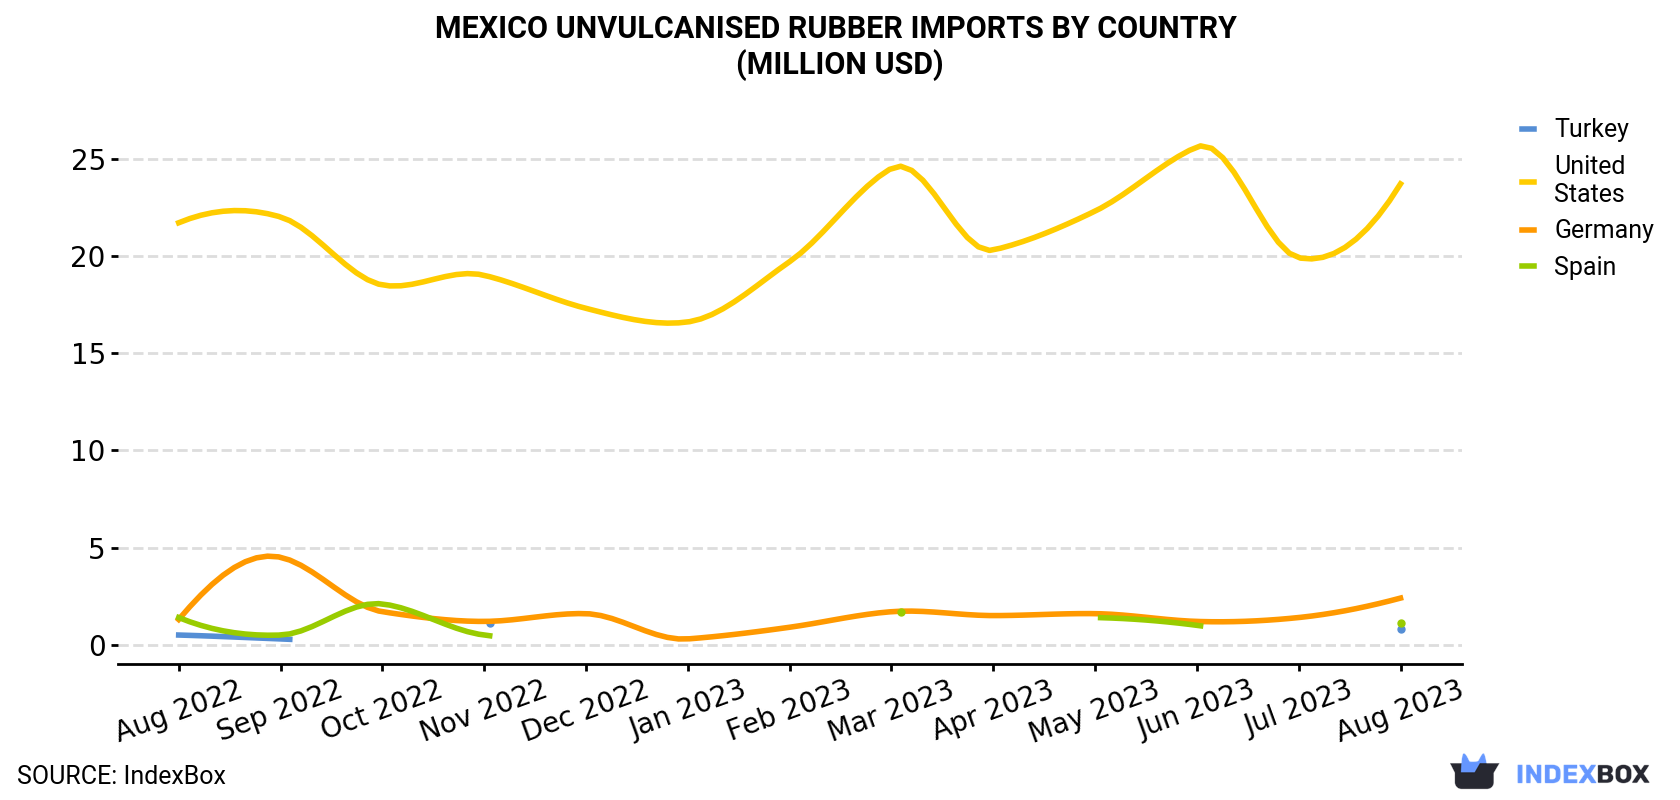 Mexico Unvulcanised Rubber Imports By Country (Million USD)